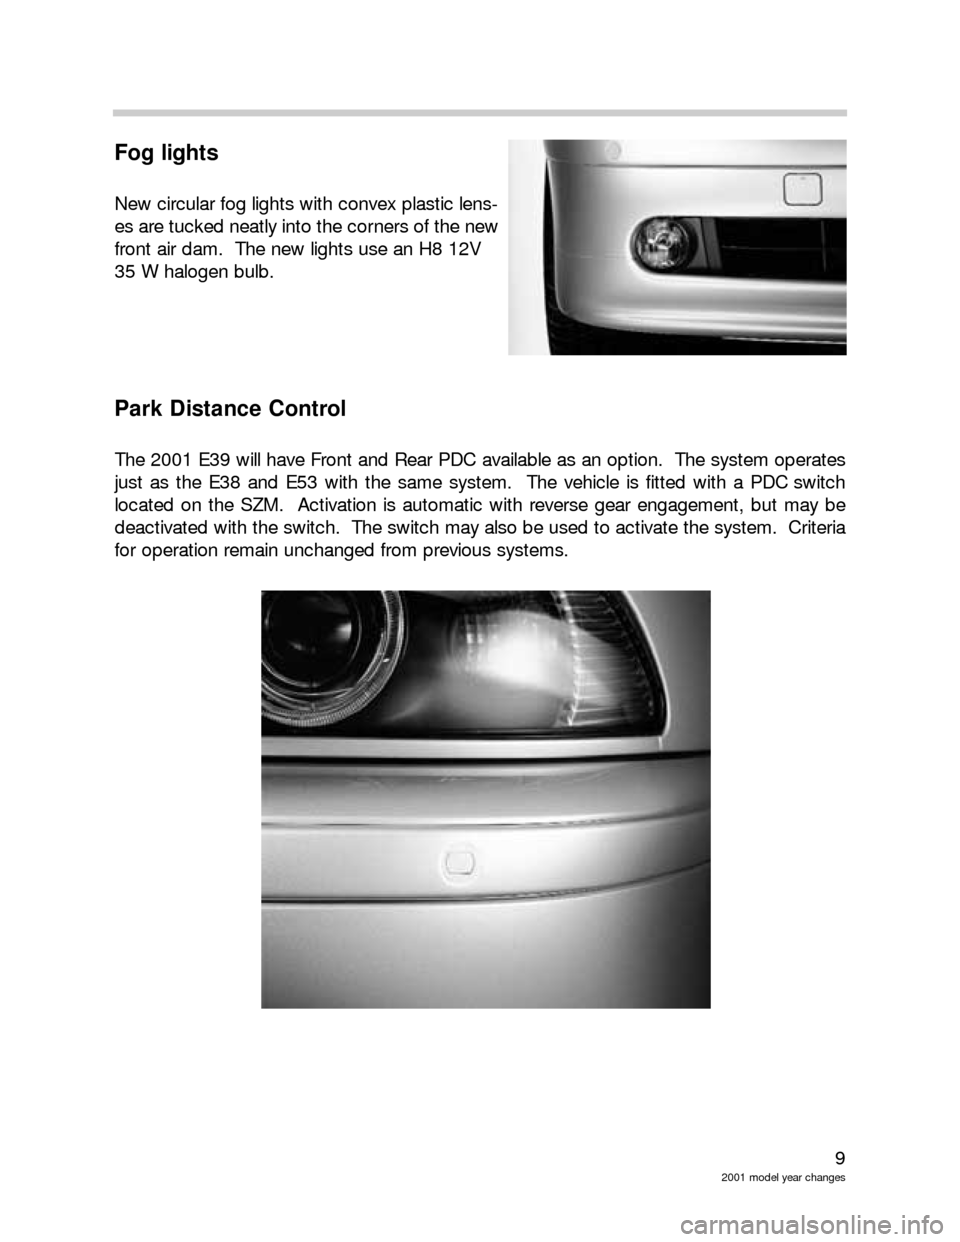 BMW 3 SERIES 2002 E46 Model Yar Changes 9
2001 model year changes
Fog lights
New circular fog lights with convex plastic lens-
es are tucked neatly into the corners of the new
front air dam.  The new lights use an H8 12V 
35 W halogen bulb.